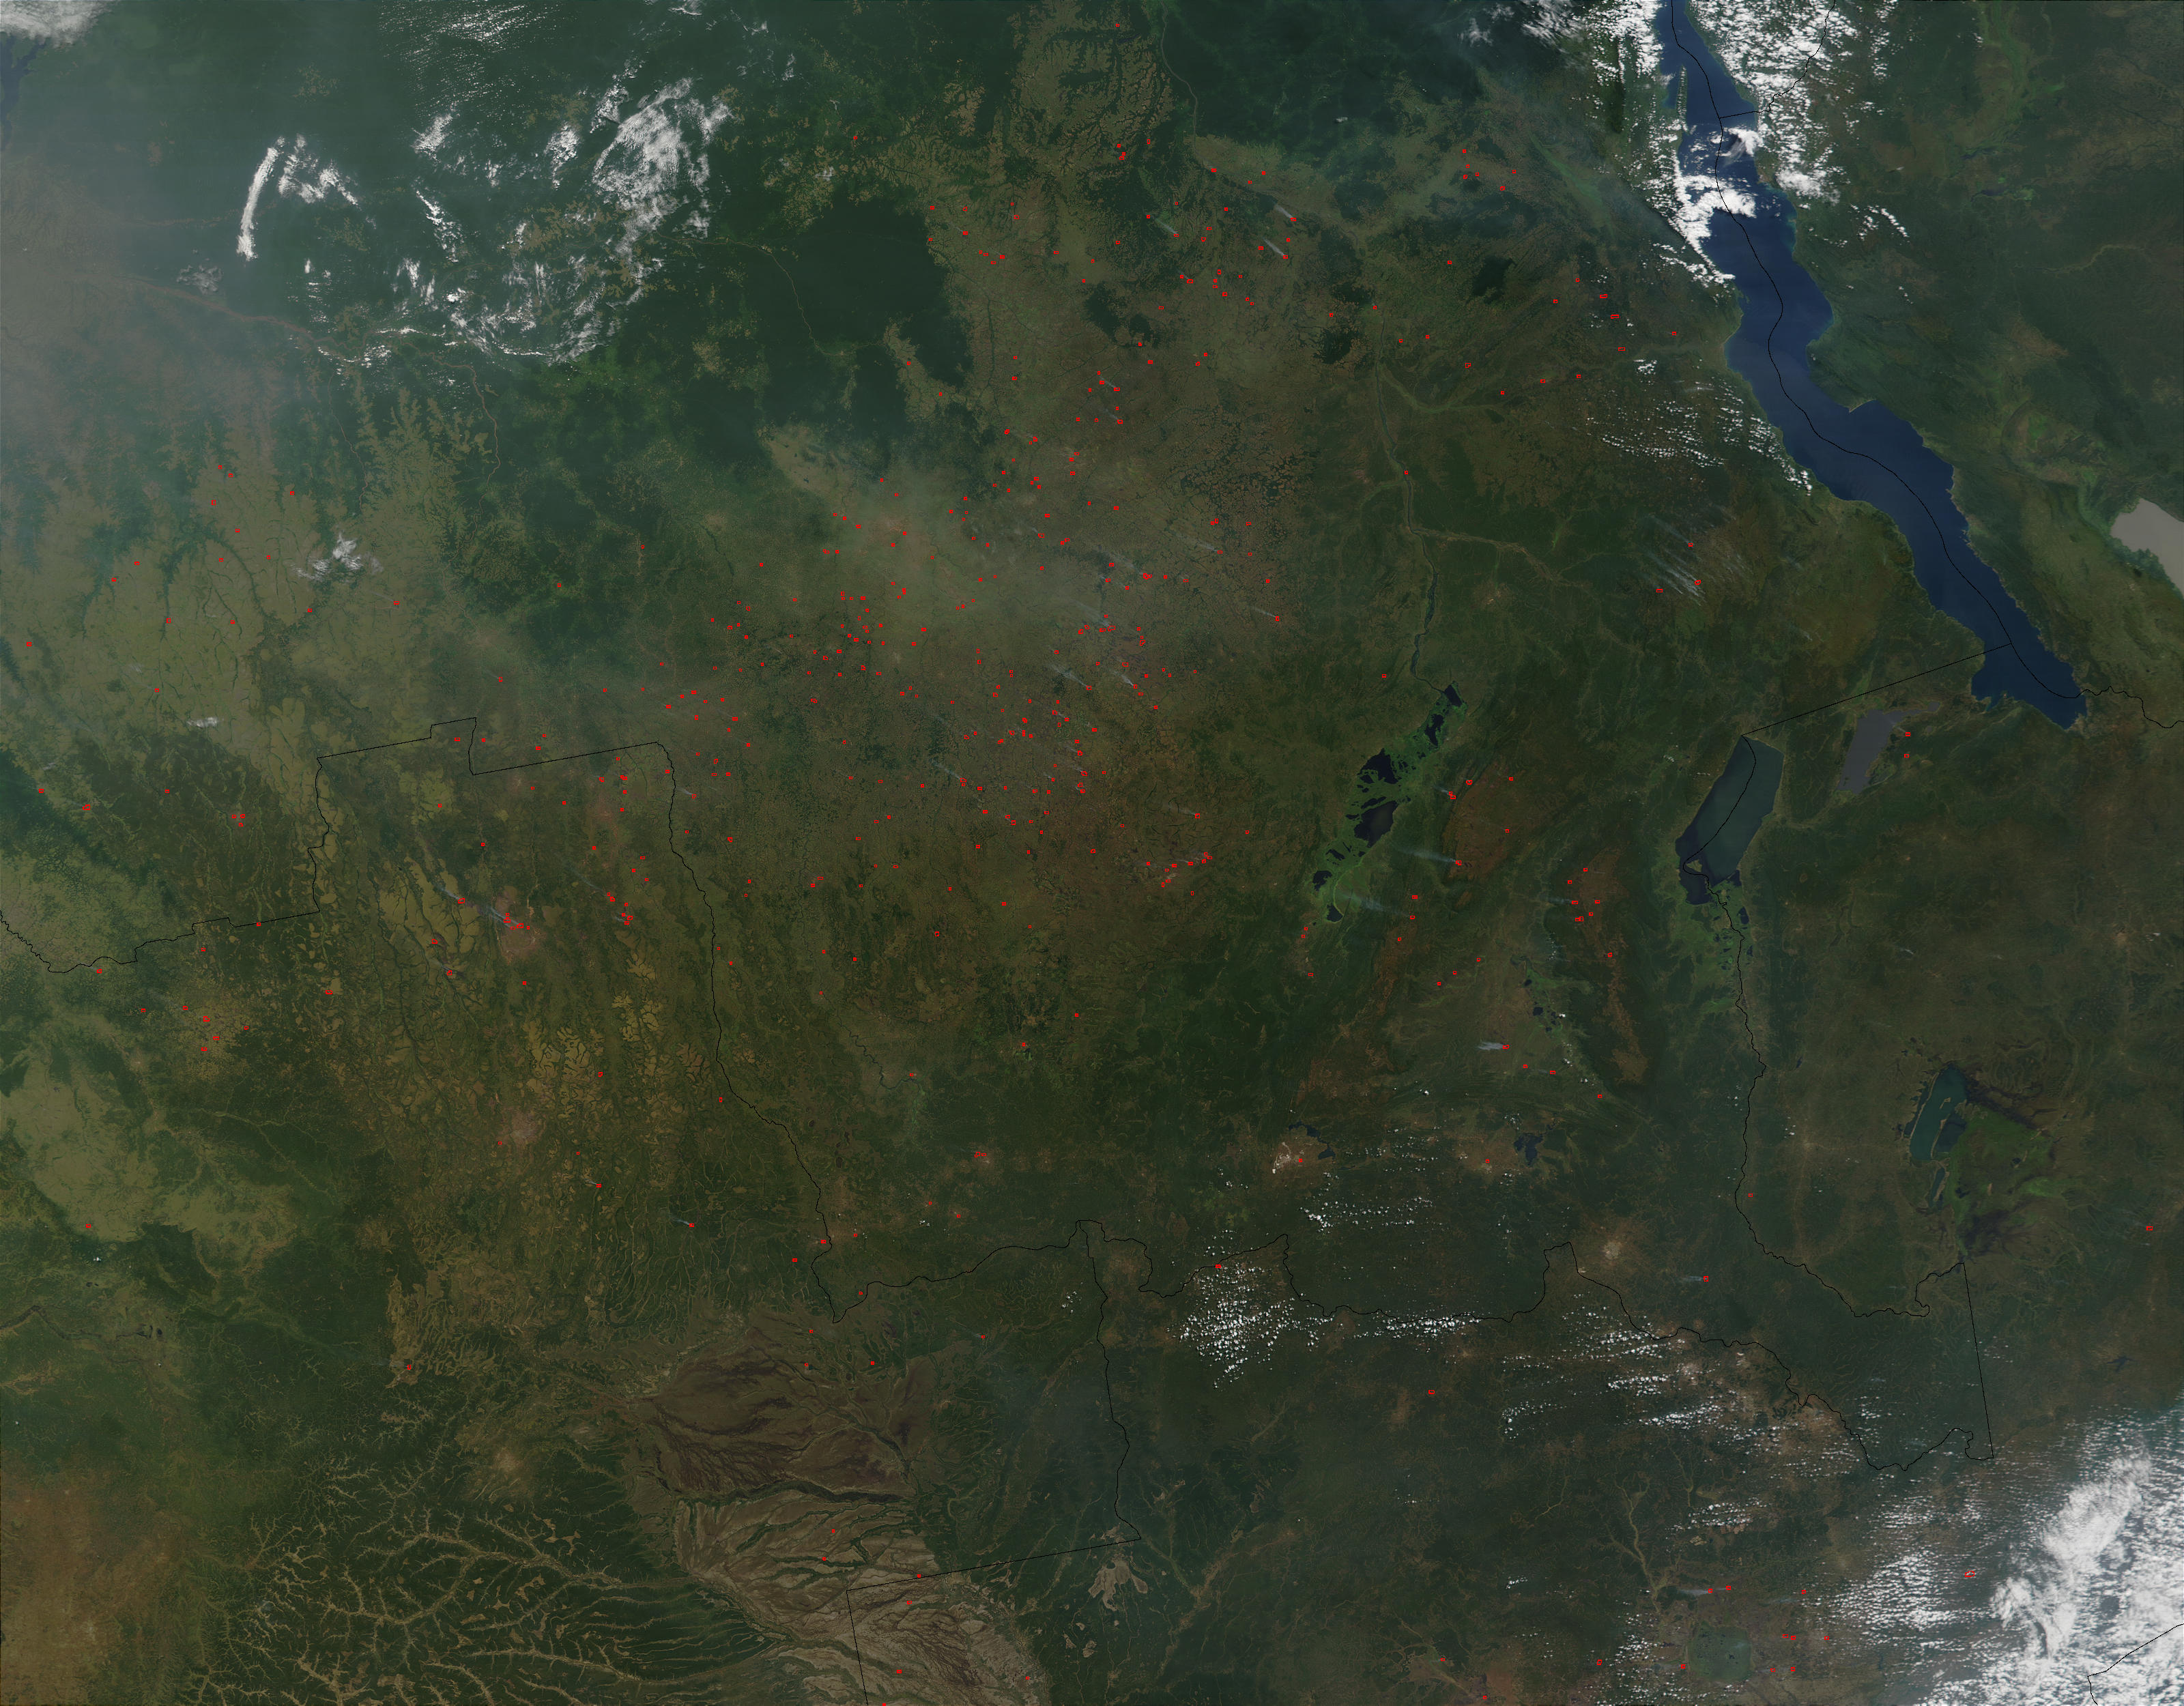 Fires in Democratic Republic of the Congo, Angola, and Zambia - related image preview